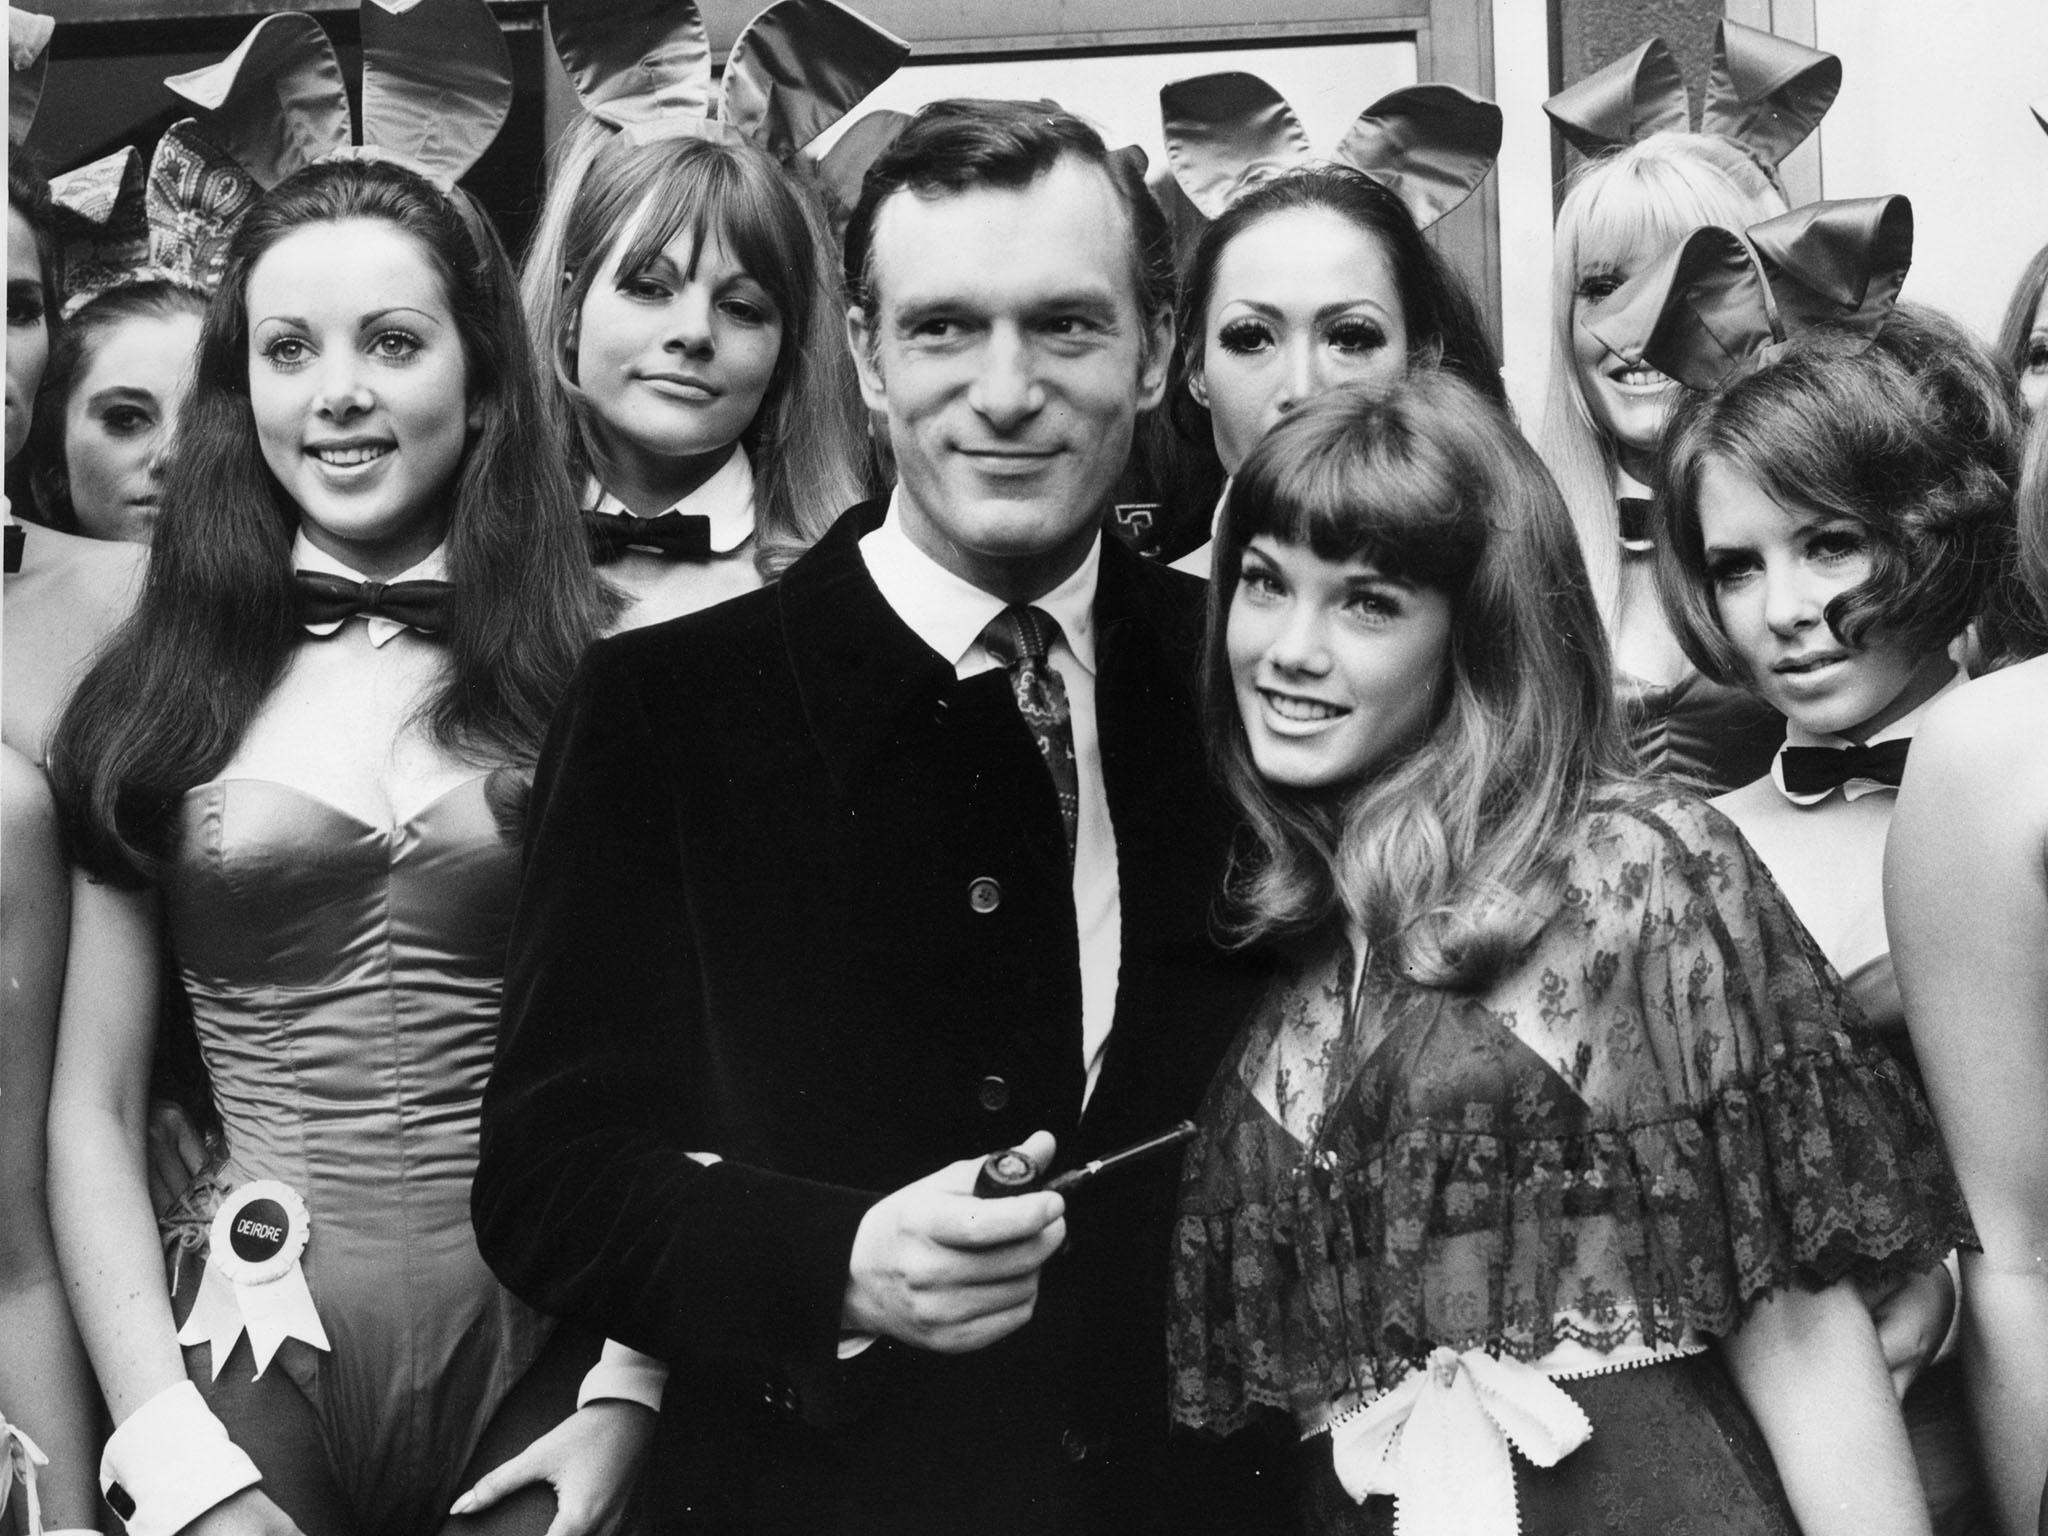 Hef may be divisive, but he still remains one of the most defining figures of 20th-century America 